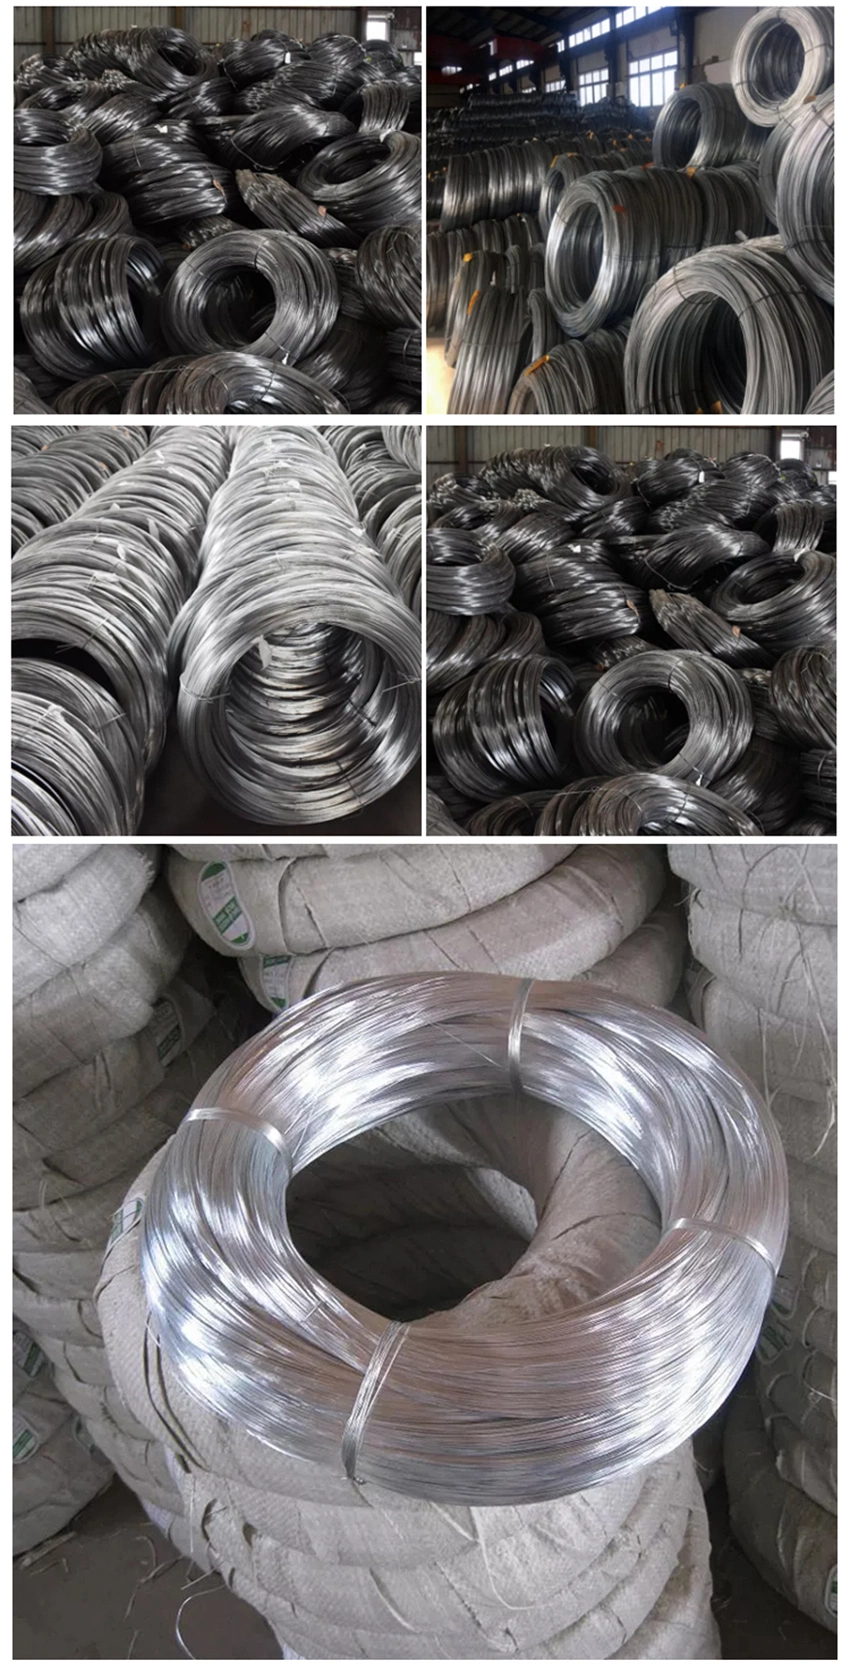 Hot Dipped Galvanized Steel Wire 12/ 16/ 18 Gauge Electro Galvanized Gi Iron Binding Wire Made in China